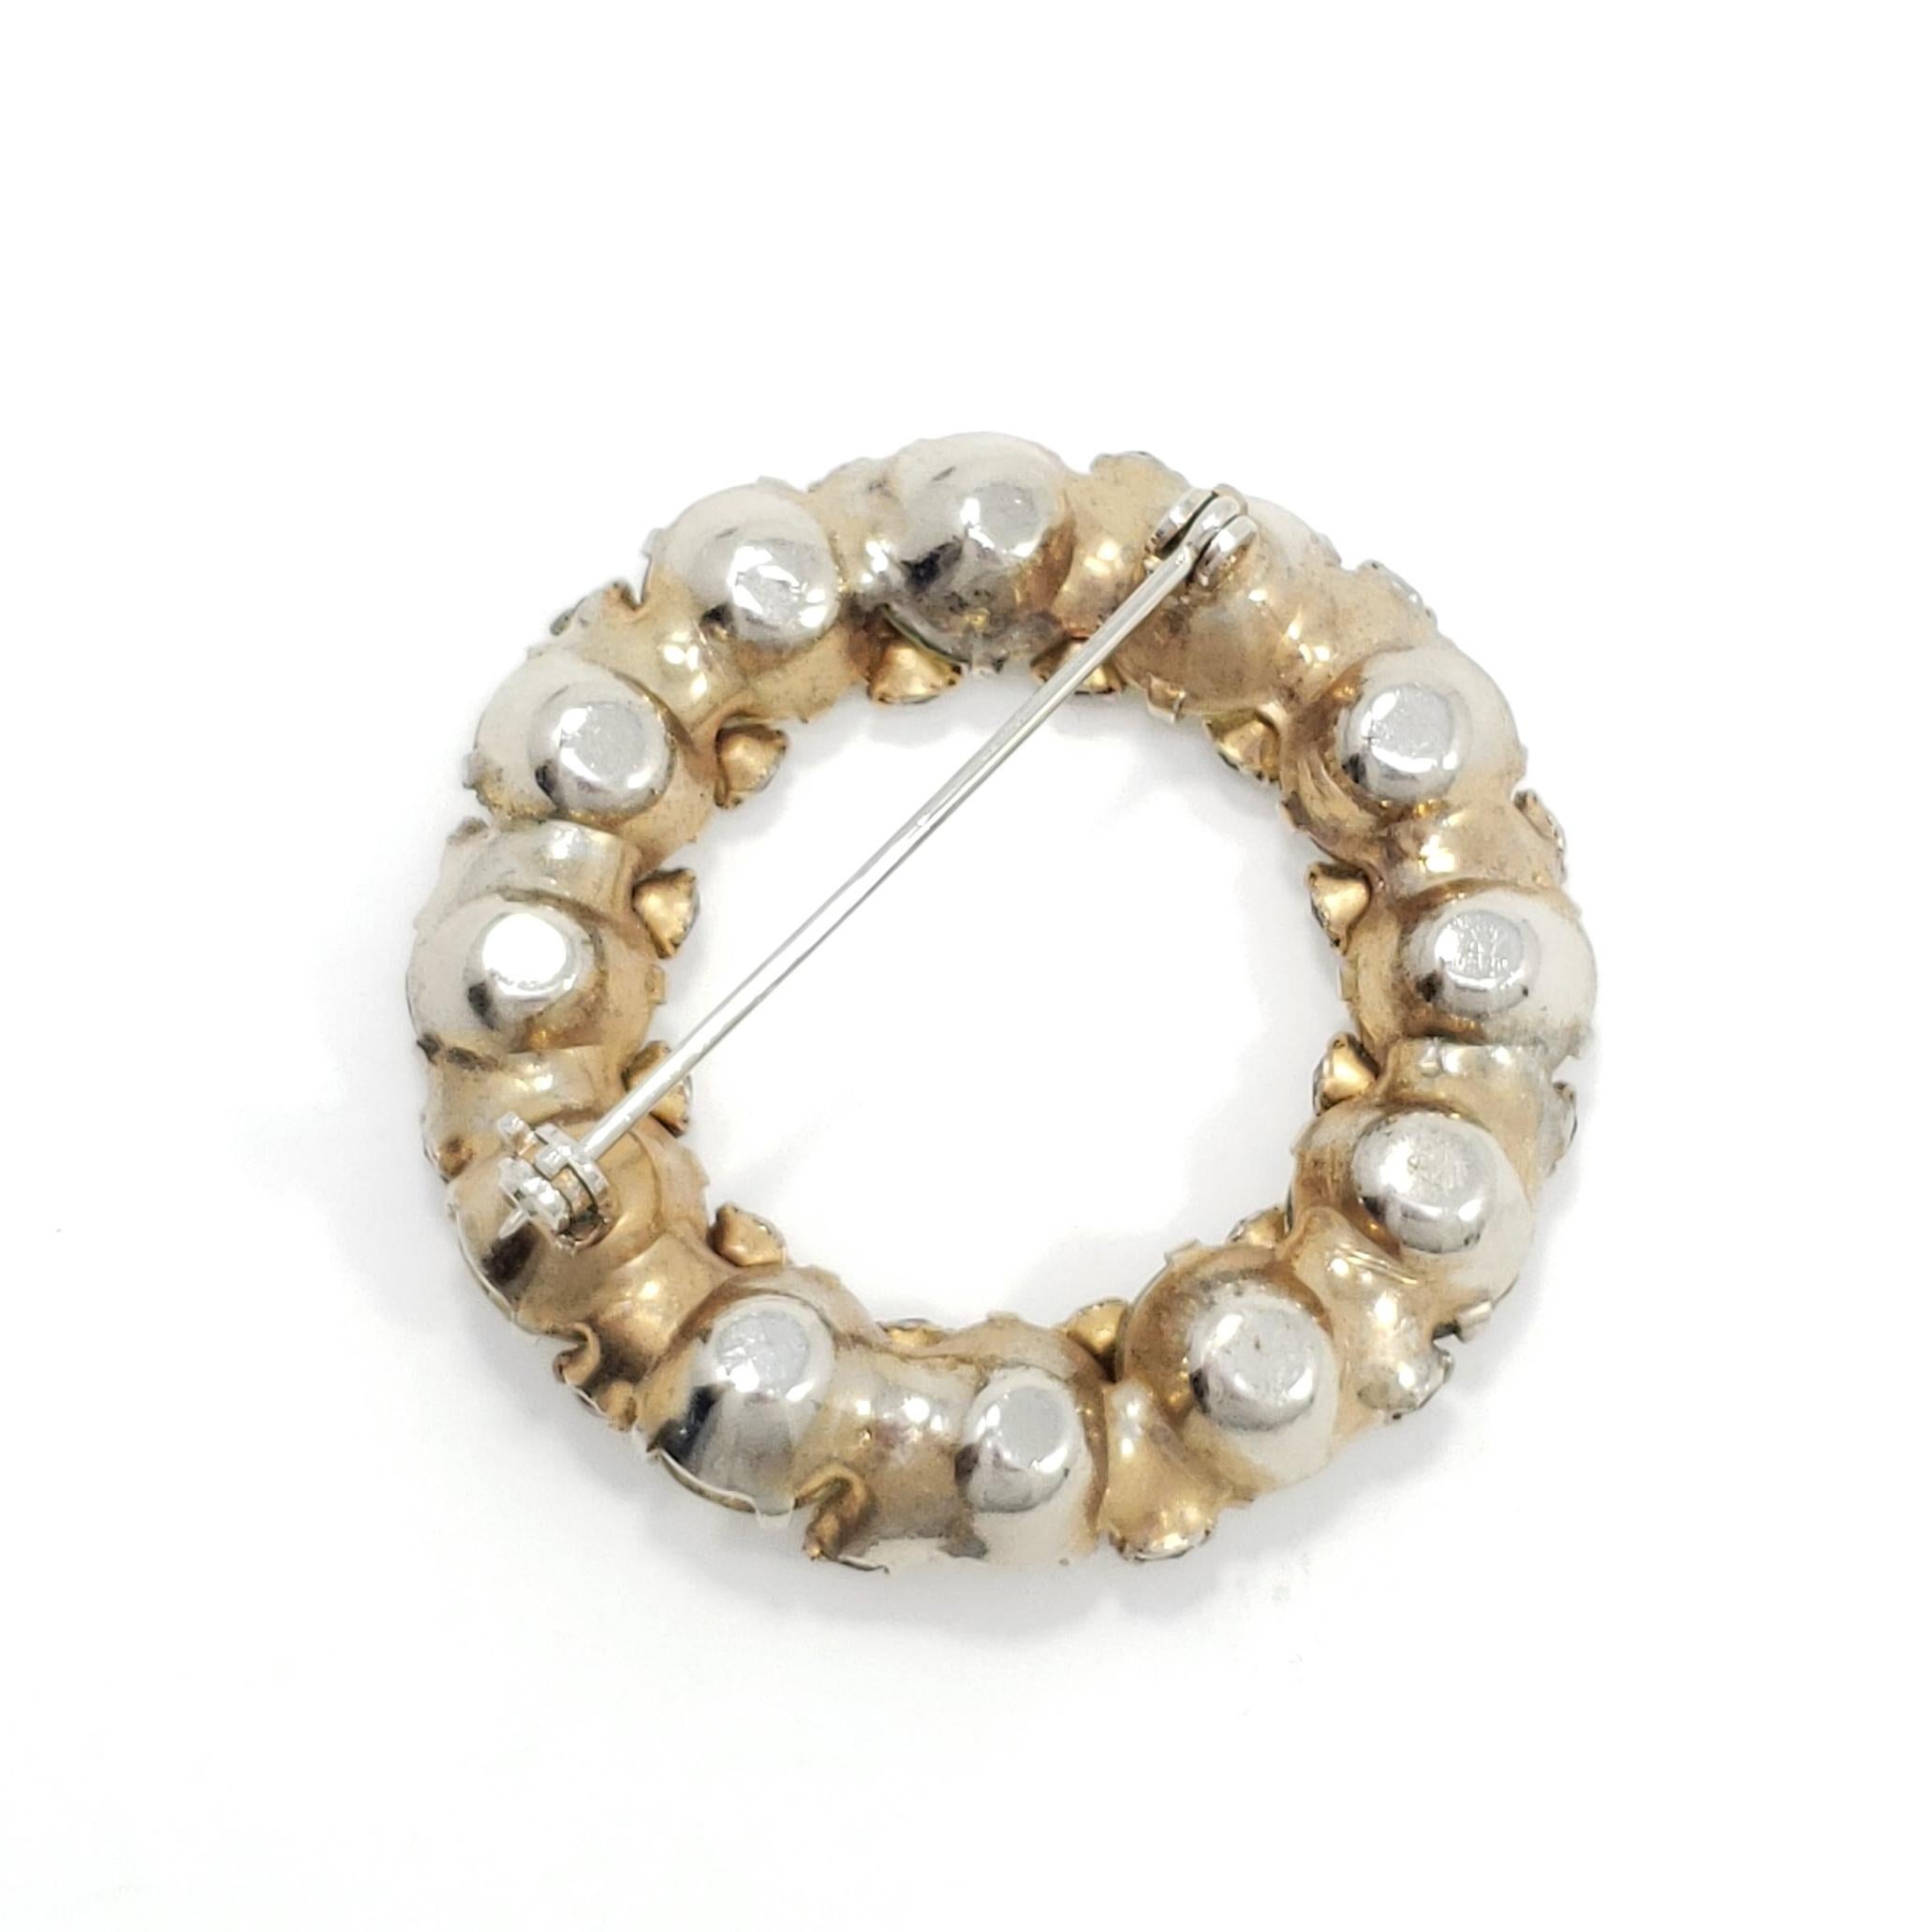 Retro Round Crystal Brooch in Brass, Dark Topaz and Jonquil Crystals In Good Condition For Sale In Milford, DE